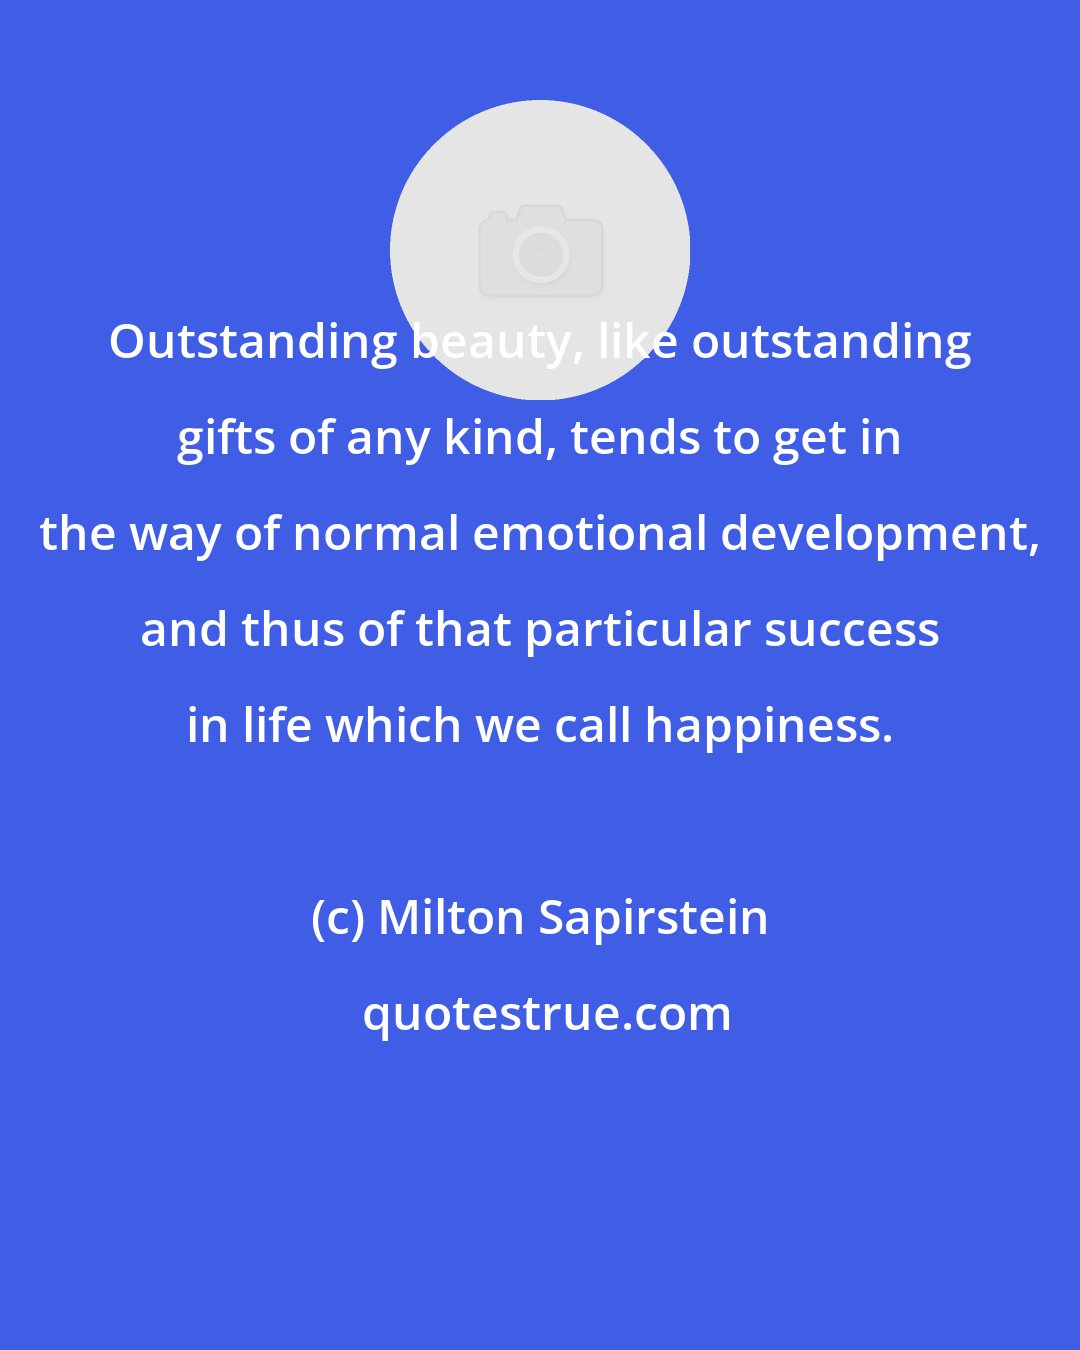 Milton Sapirstein: Outstanding beauty, like outstanding gifts of any kind, tends to get in the way of normal emotional development, and thus of that particular success in life which we call happiness.